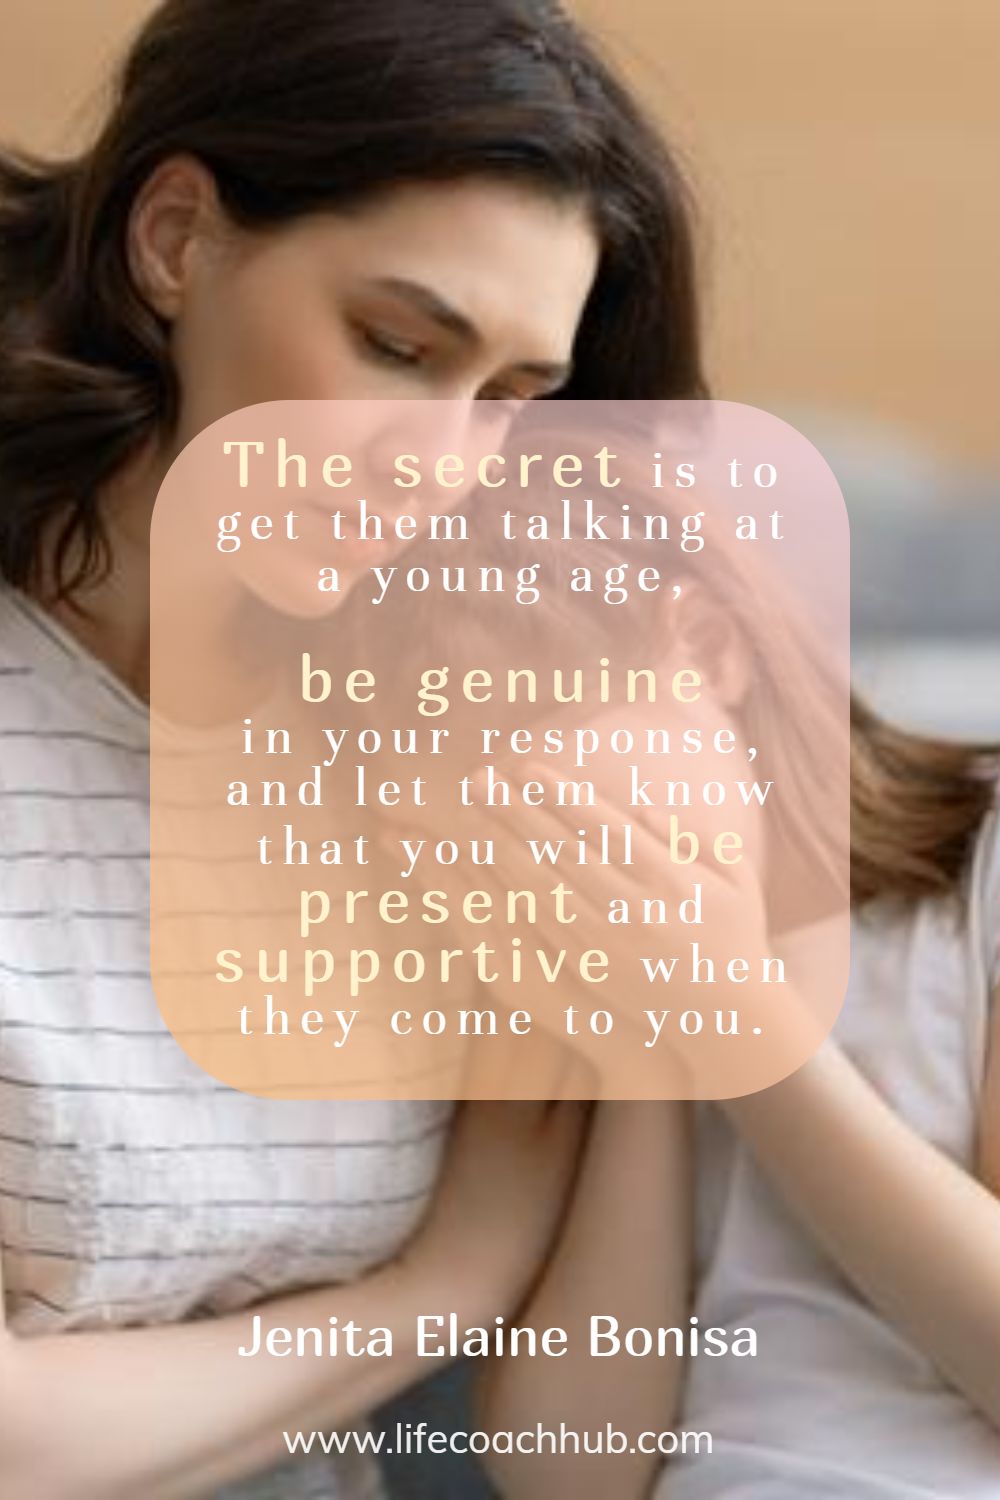 The secret is to get them talking at a young age, be genuine in your response, and let them know that you will be present and supportive when they come to you. Jenita Elaine Bonisa Coaching Quote